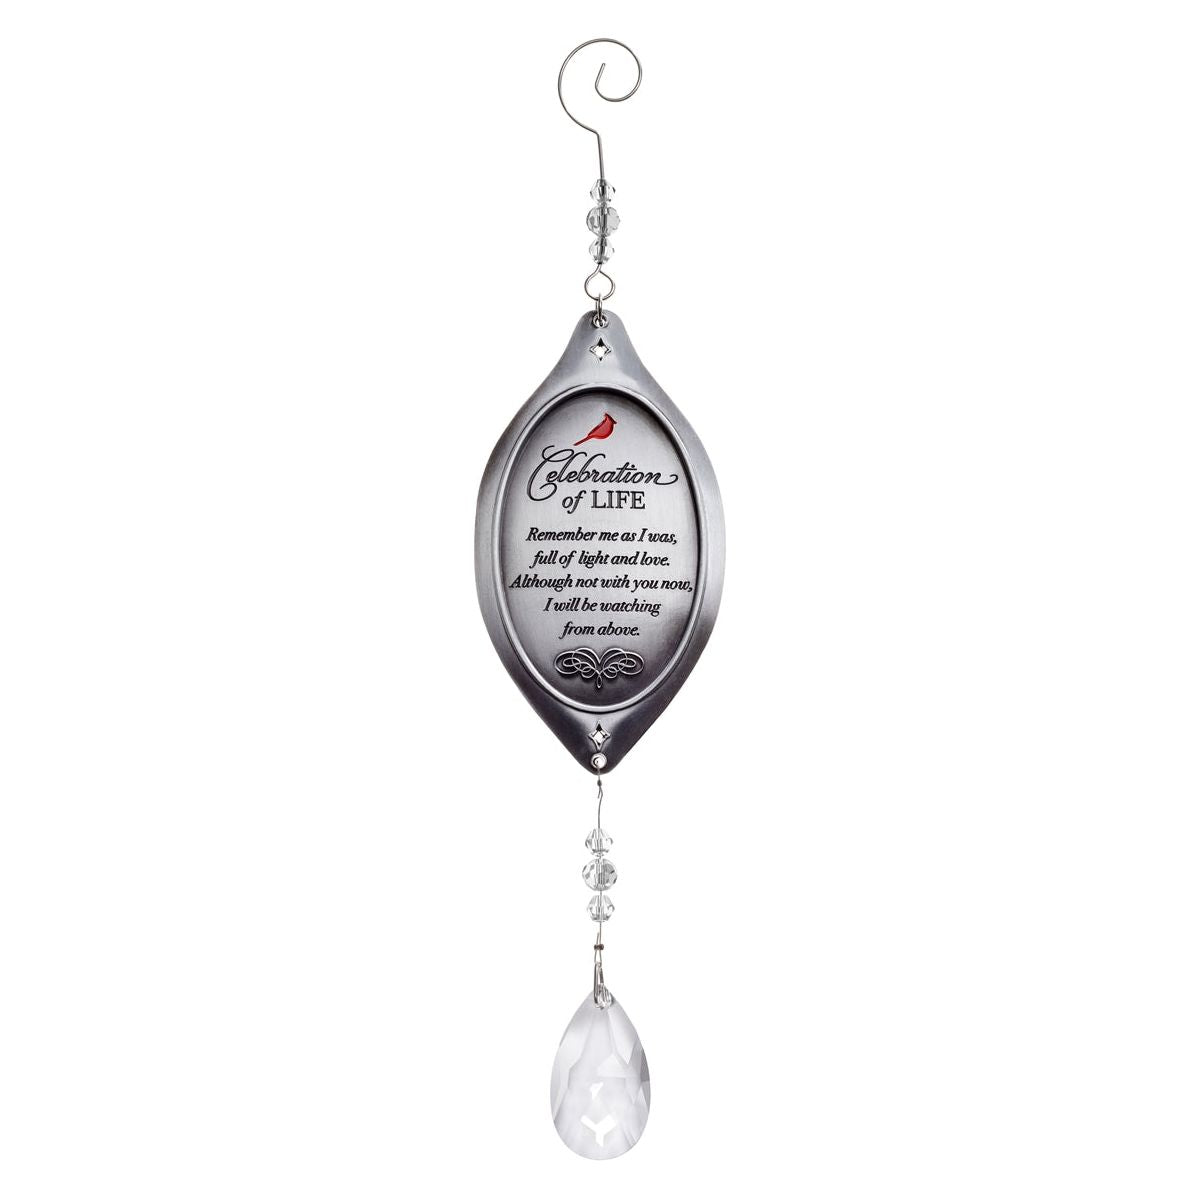 Celebration of Life Memorial Ornament- Cast metal top engraved with &quot;Celebration of Life&quot; sentiment and crystal pendant.